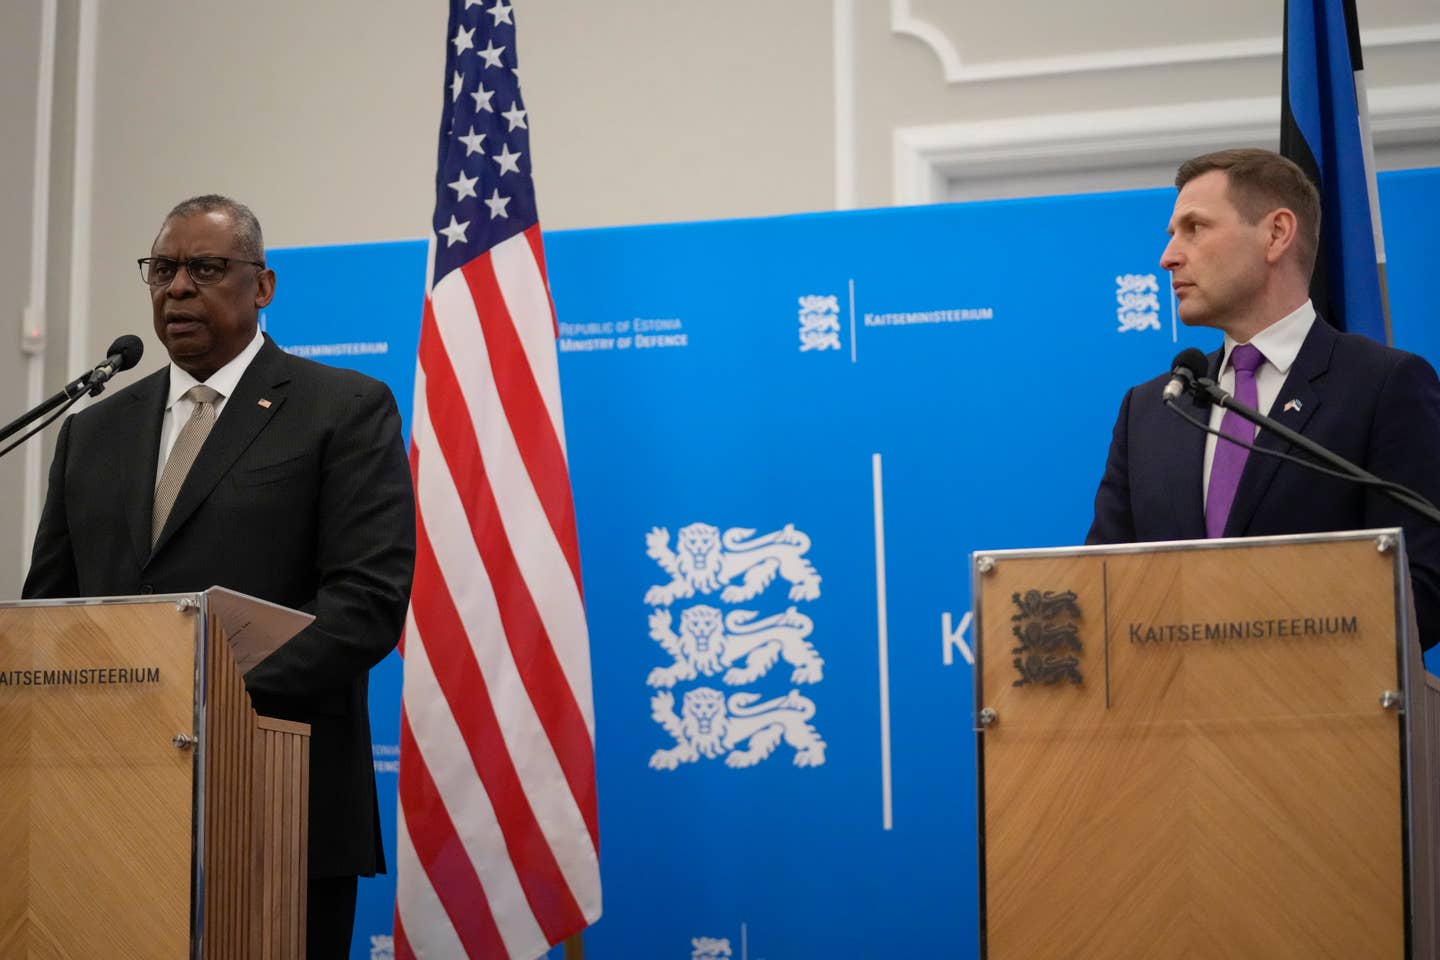 Estonian Defense Minister Hanno Pevkur, right, and United States Secretary of Defense Lloyd Austin attend a joint press conference at the Ministry of Defense after their meeting in Tallinn, Estonia, Feb. 16, 2023. (AP Photo/Sergei Grits)